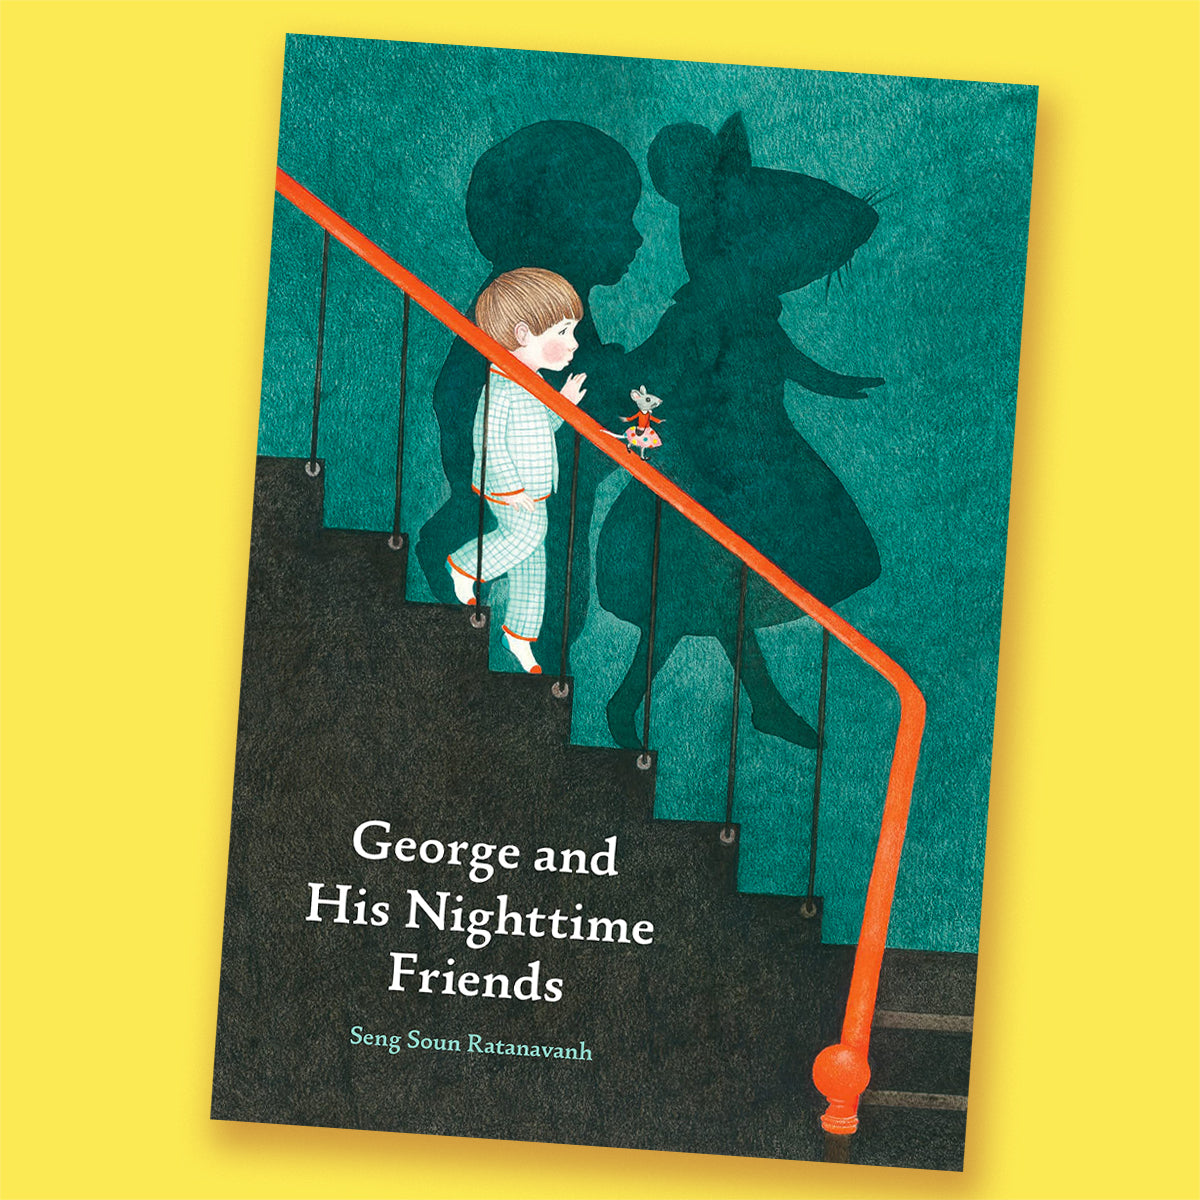 George and His Nighttime Friends by Seng Soun Ratanavanh